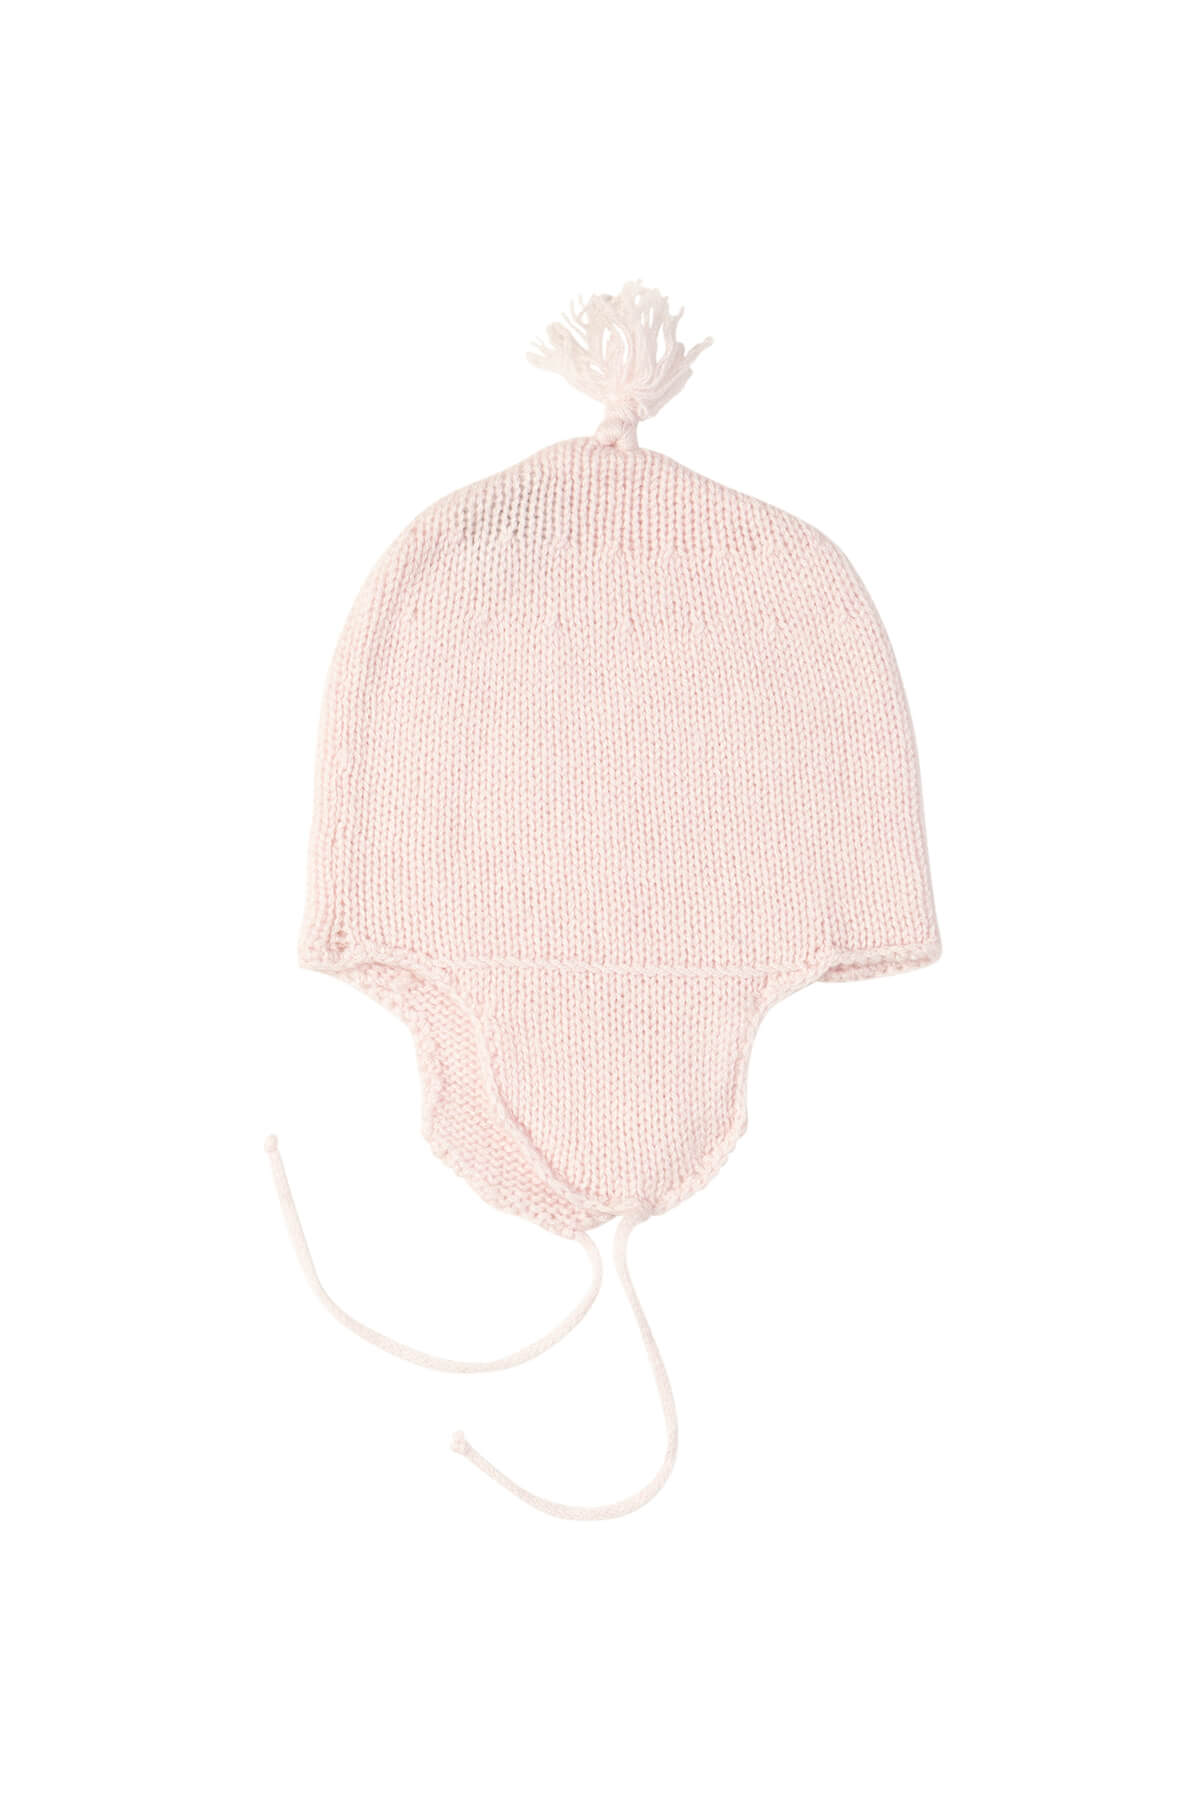 Johnstons of Elgin’s Baby's 1st Cashmere Accessories Gift Set with Blush Pink Cashmere Baby Hat on a white background AW21GIFTSET20B